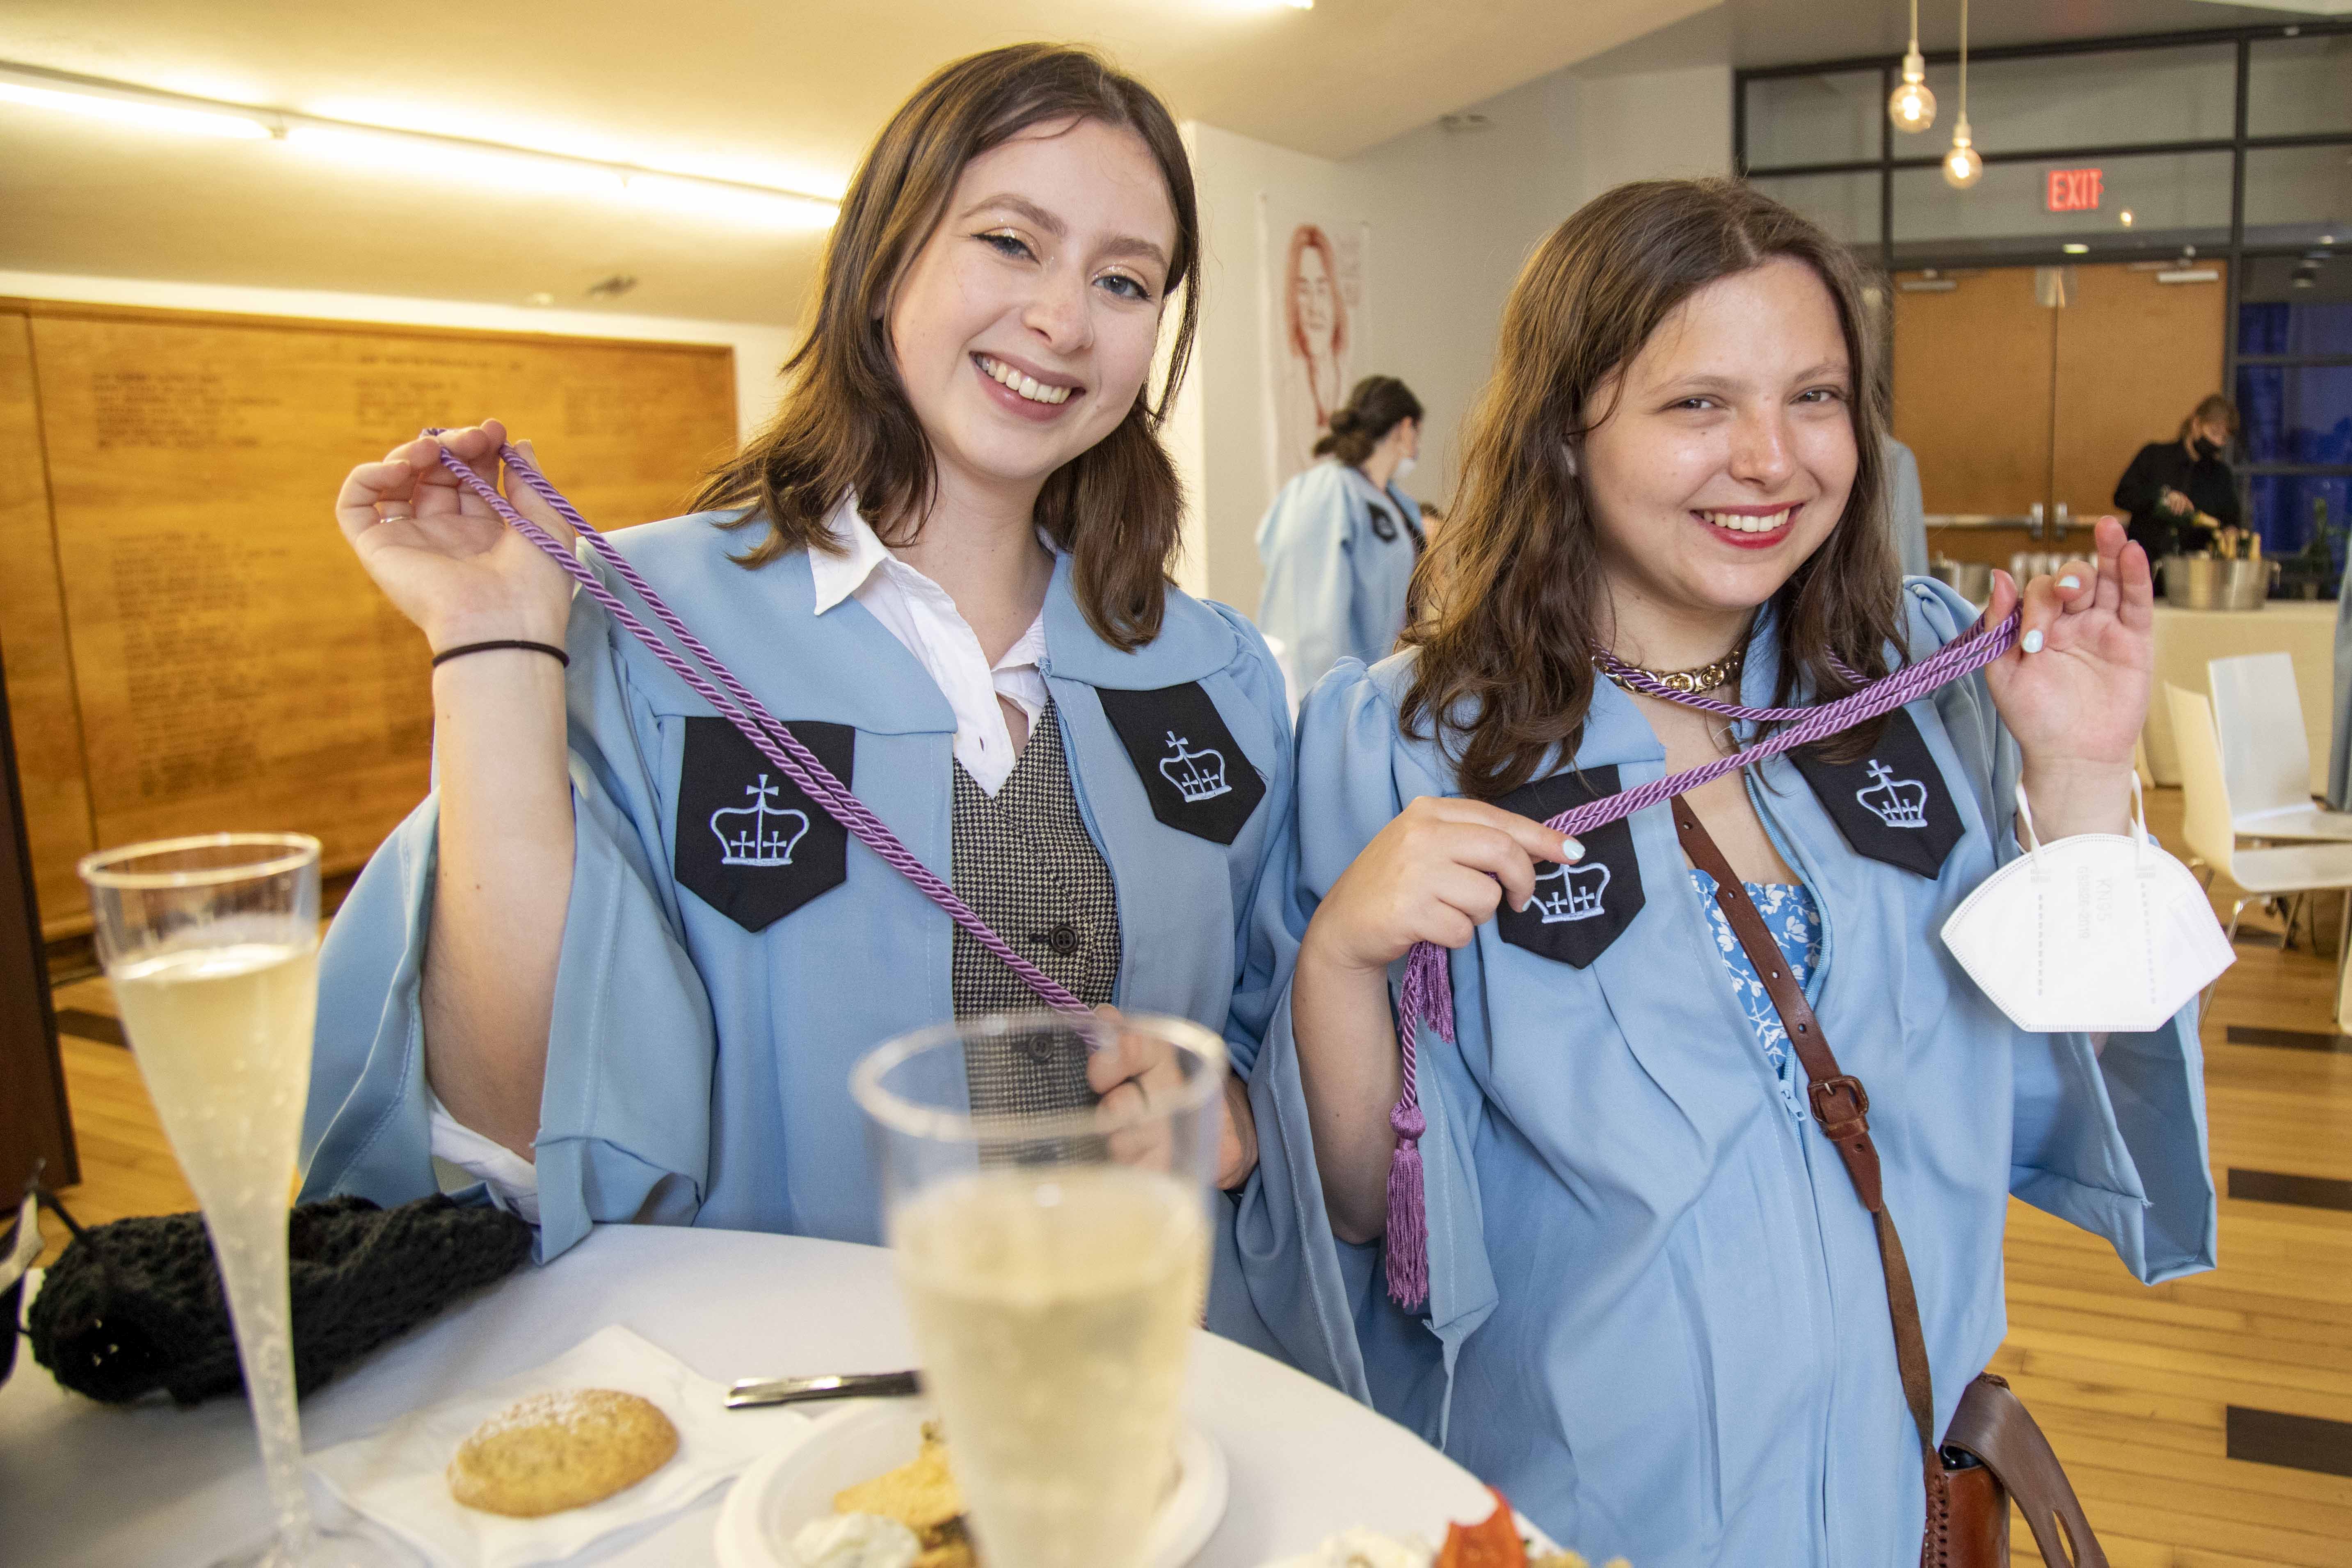 Barnard seniors Emma Tabenken and Caitlin Lent show off their newly acquired lavender cords at Barnard’s first-ever Lavender Graduation